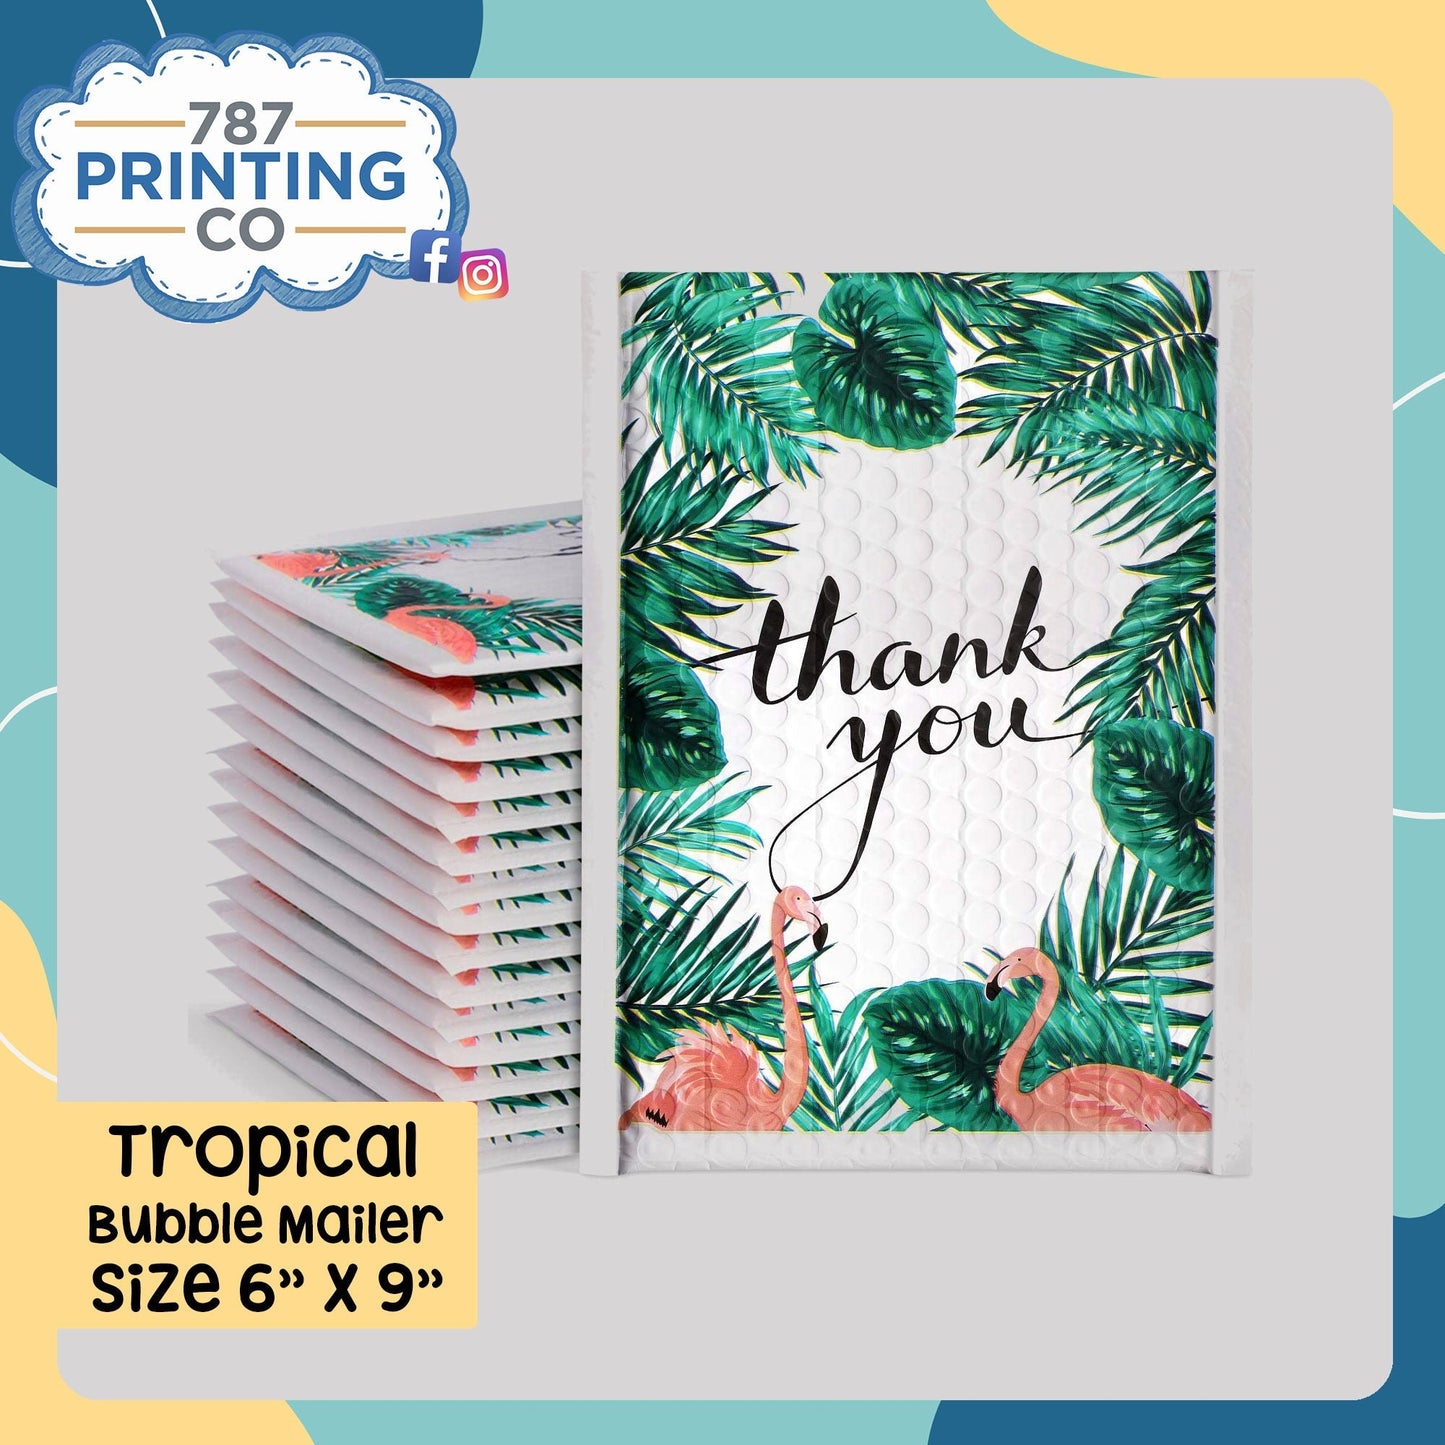 Tropical 6" x 9" Bubble Mailers - 787 Printing Co.